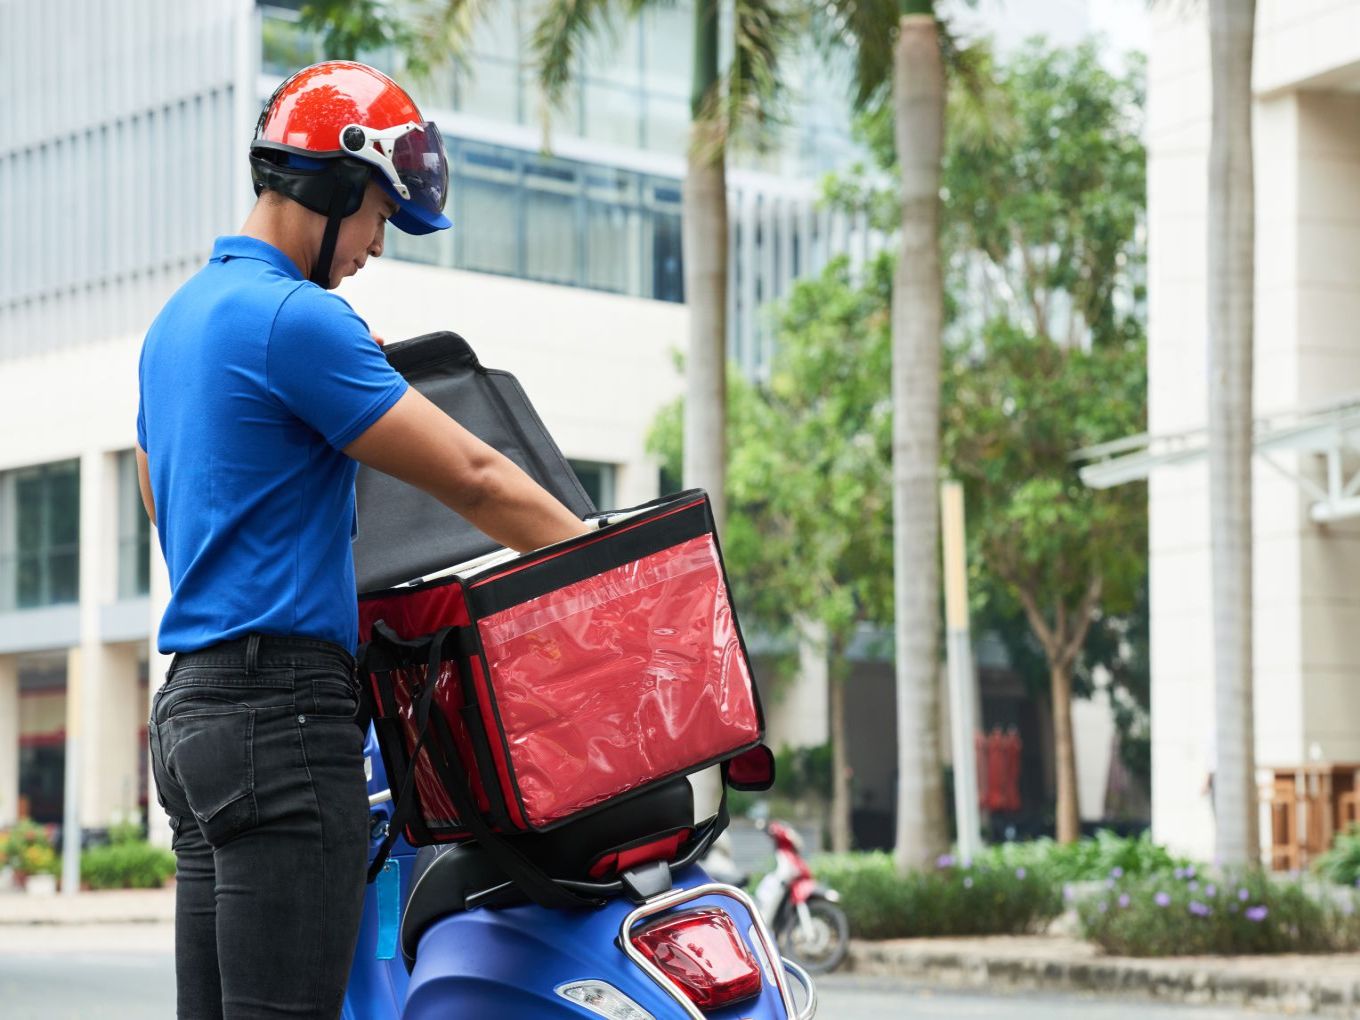 Bengaluru Police Warns Swiggy, Zomato Over Reckless Delivery Riders